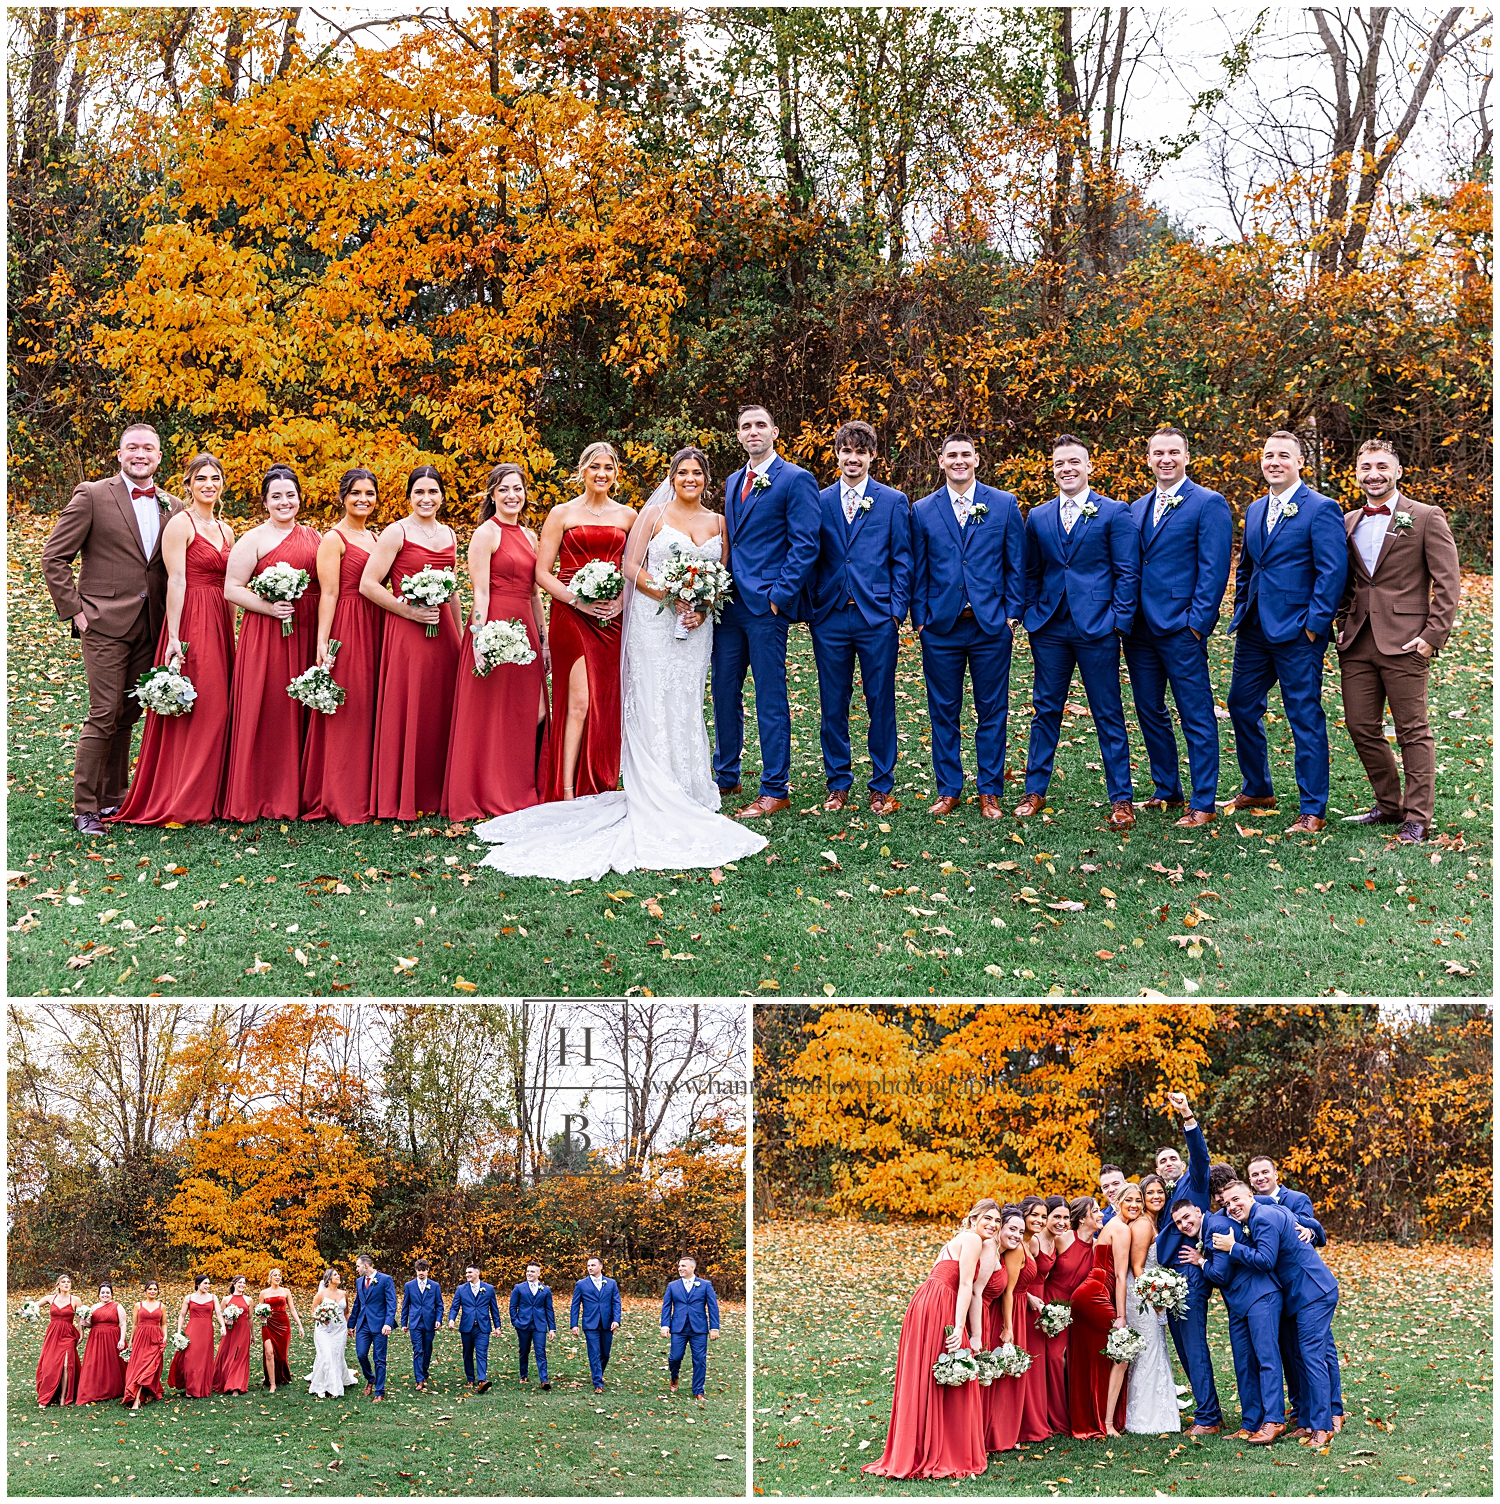 Bridal party stands together for group photo in front of orange trees